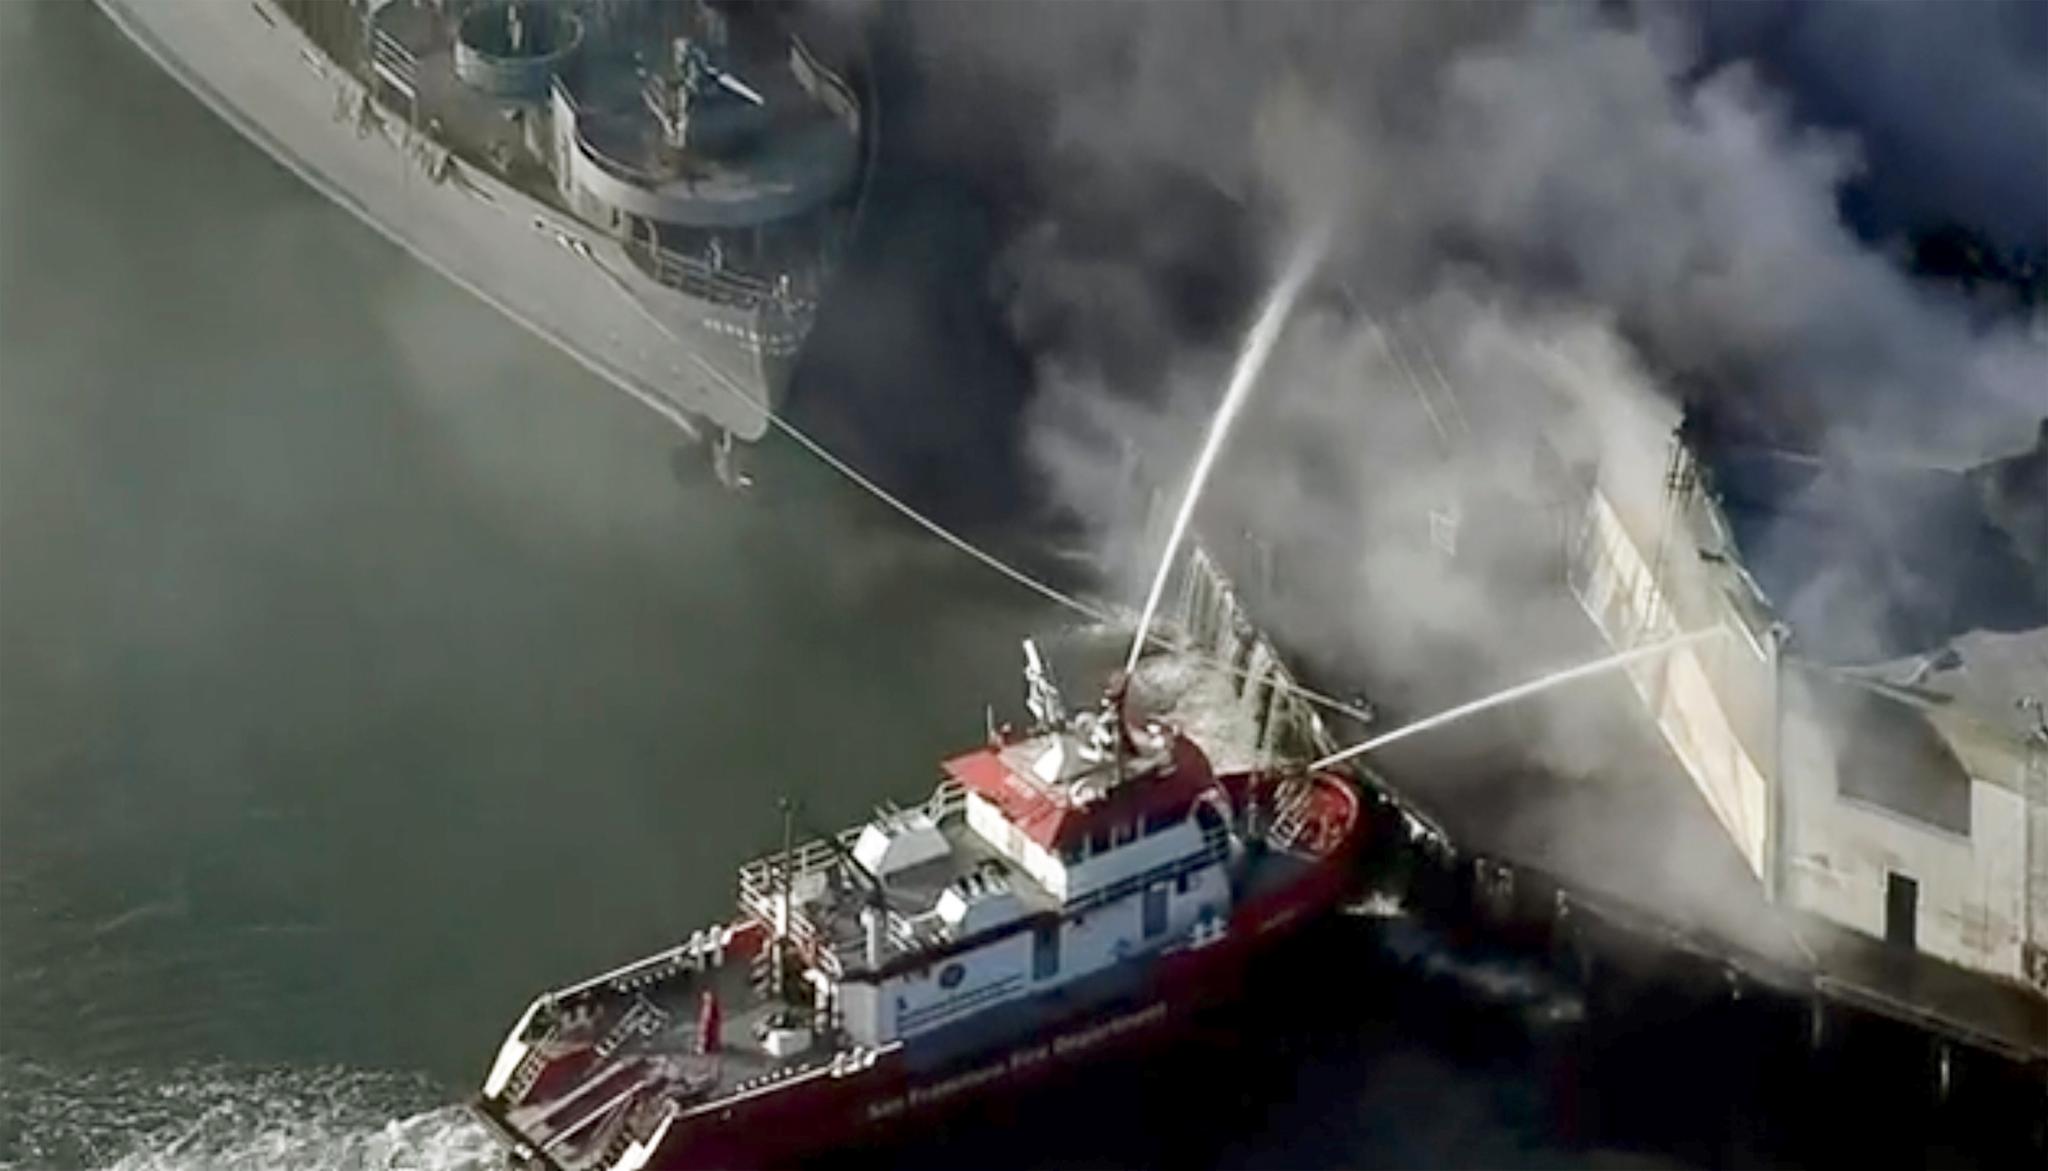 Boat douses fire at Fisherman's Wharf in San Francisco